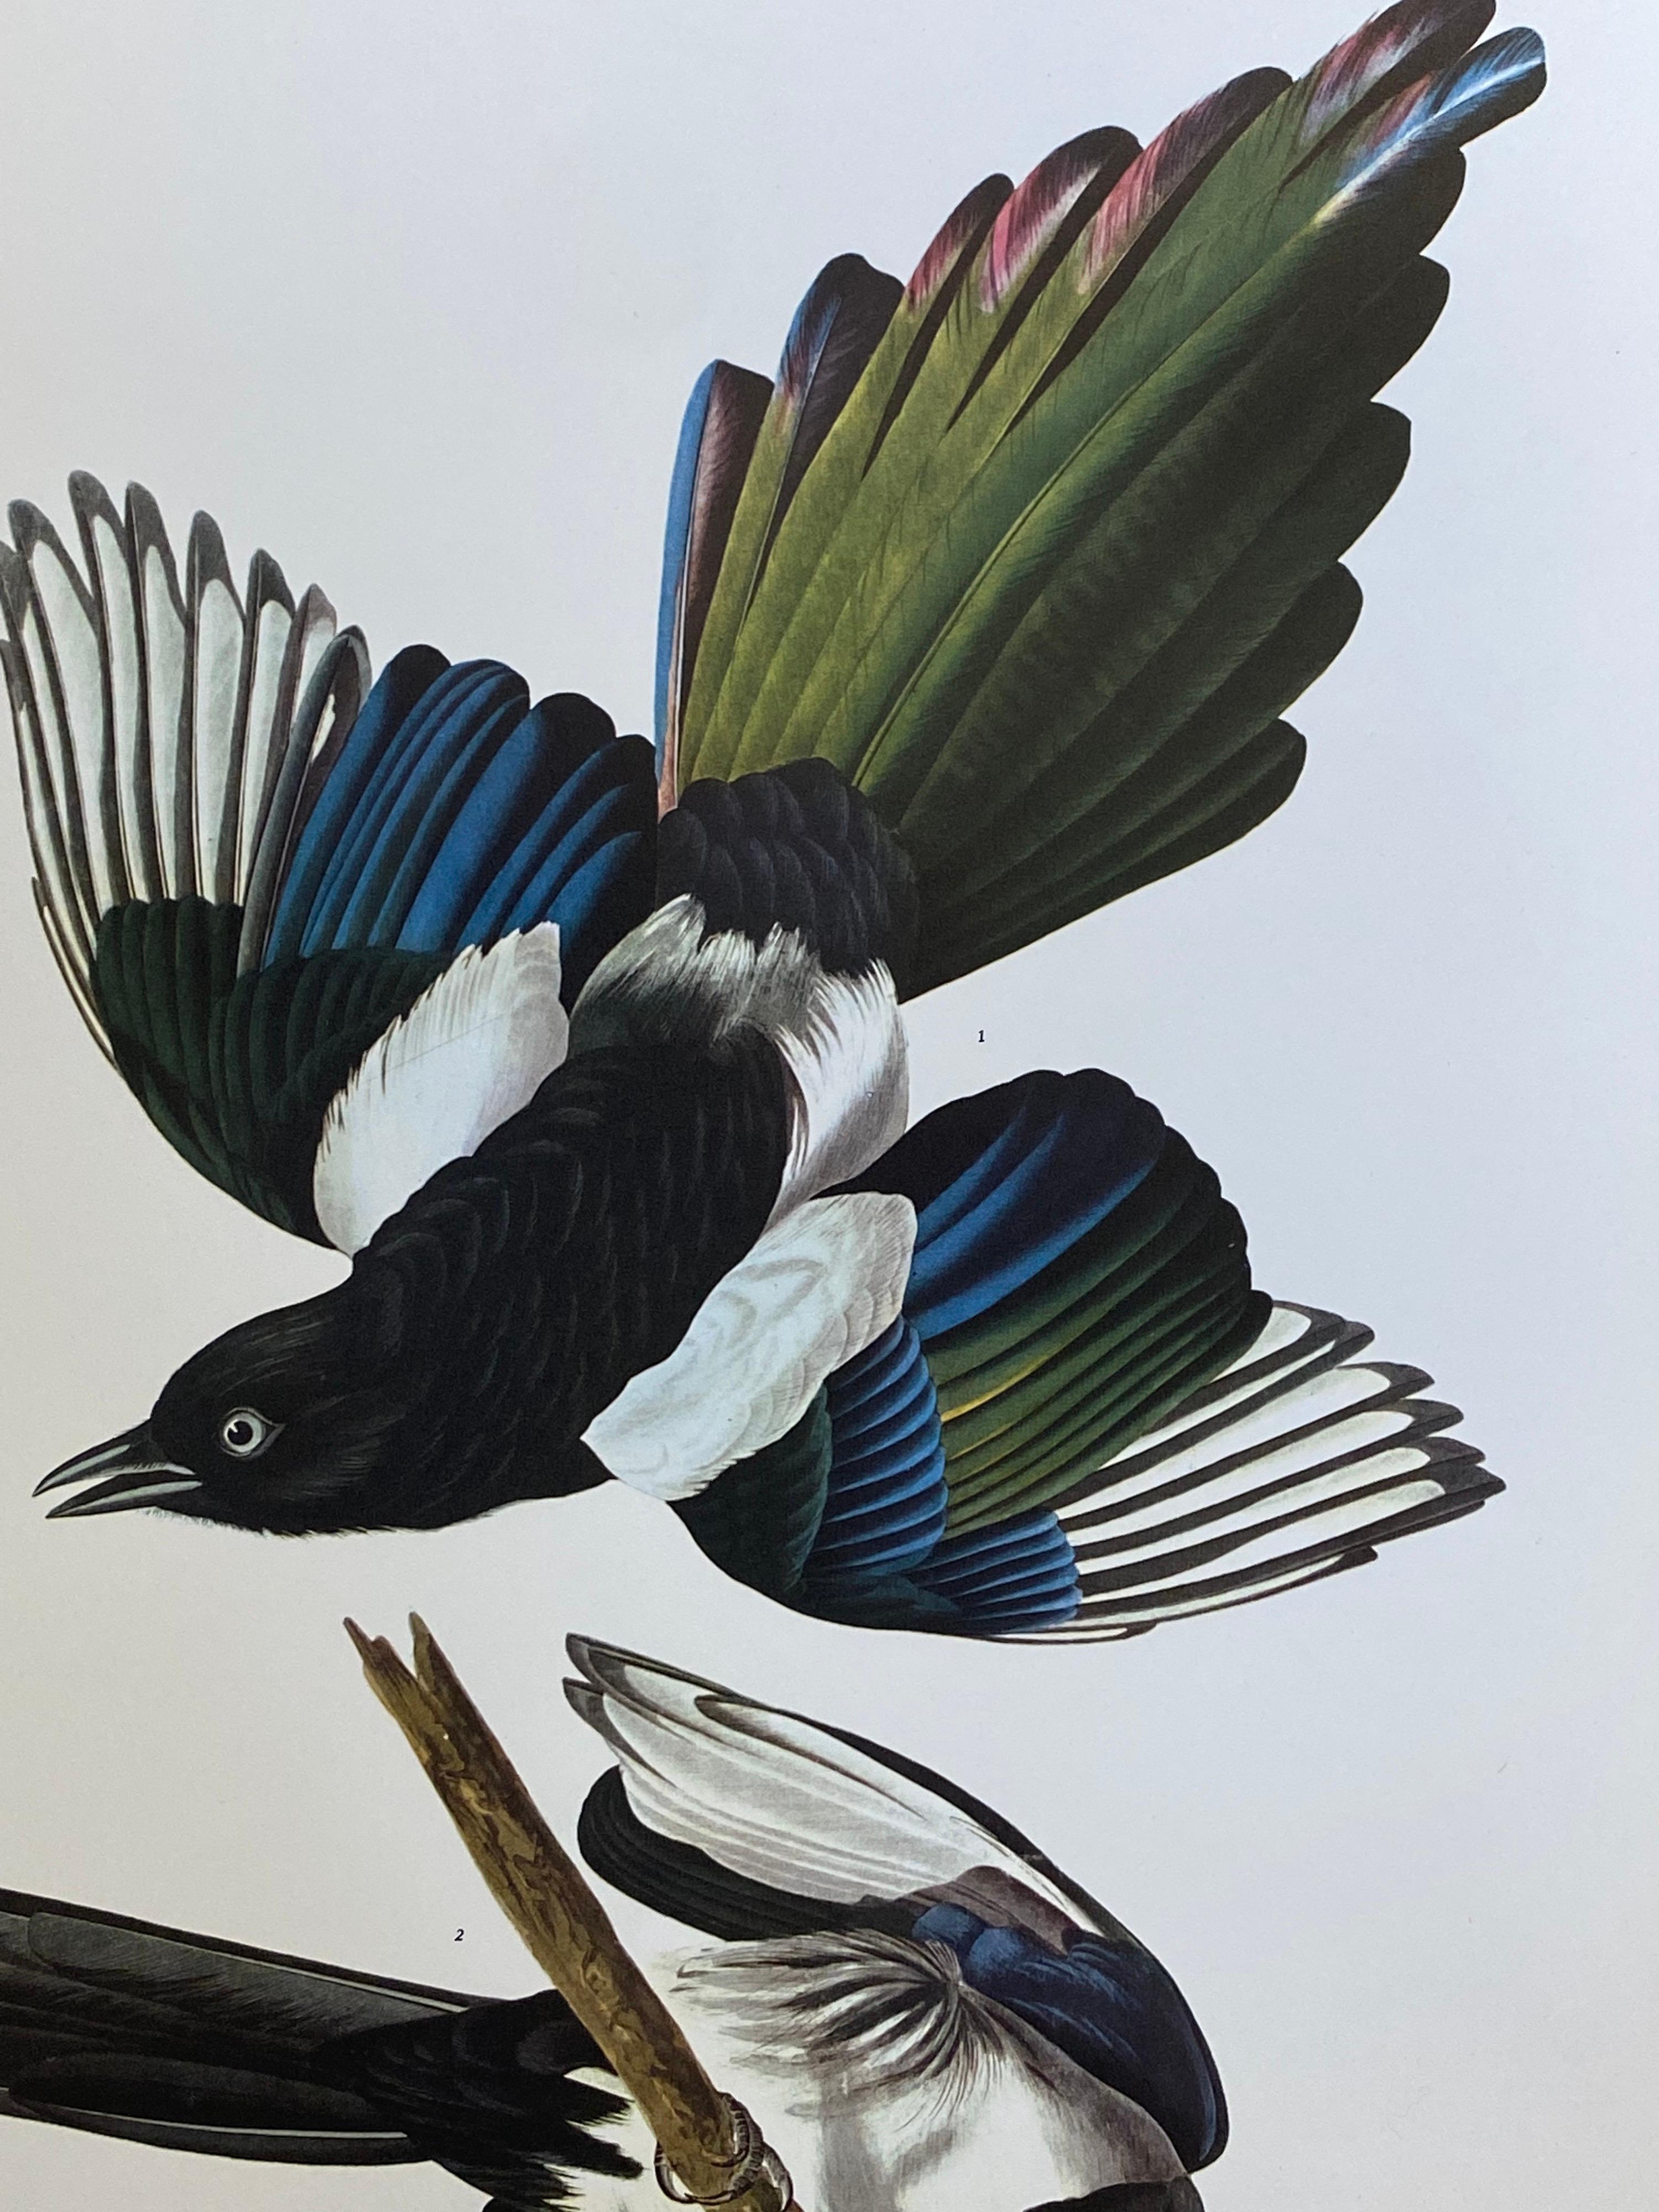 Classical bird print, 
after John James Audubon, 
printed by Harry N. Abrams, Publishers, New York
unframed, 17 x 14 inches color print on paper
condition: very good
provenance: from a private collector here in the UK. 

Free shipping